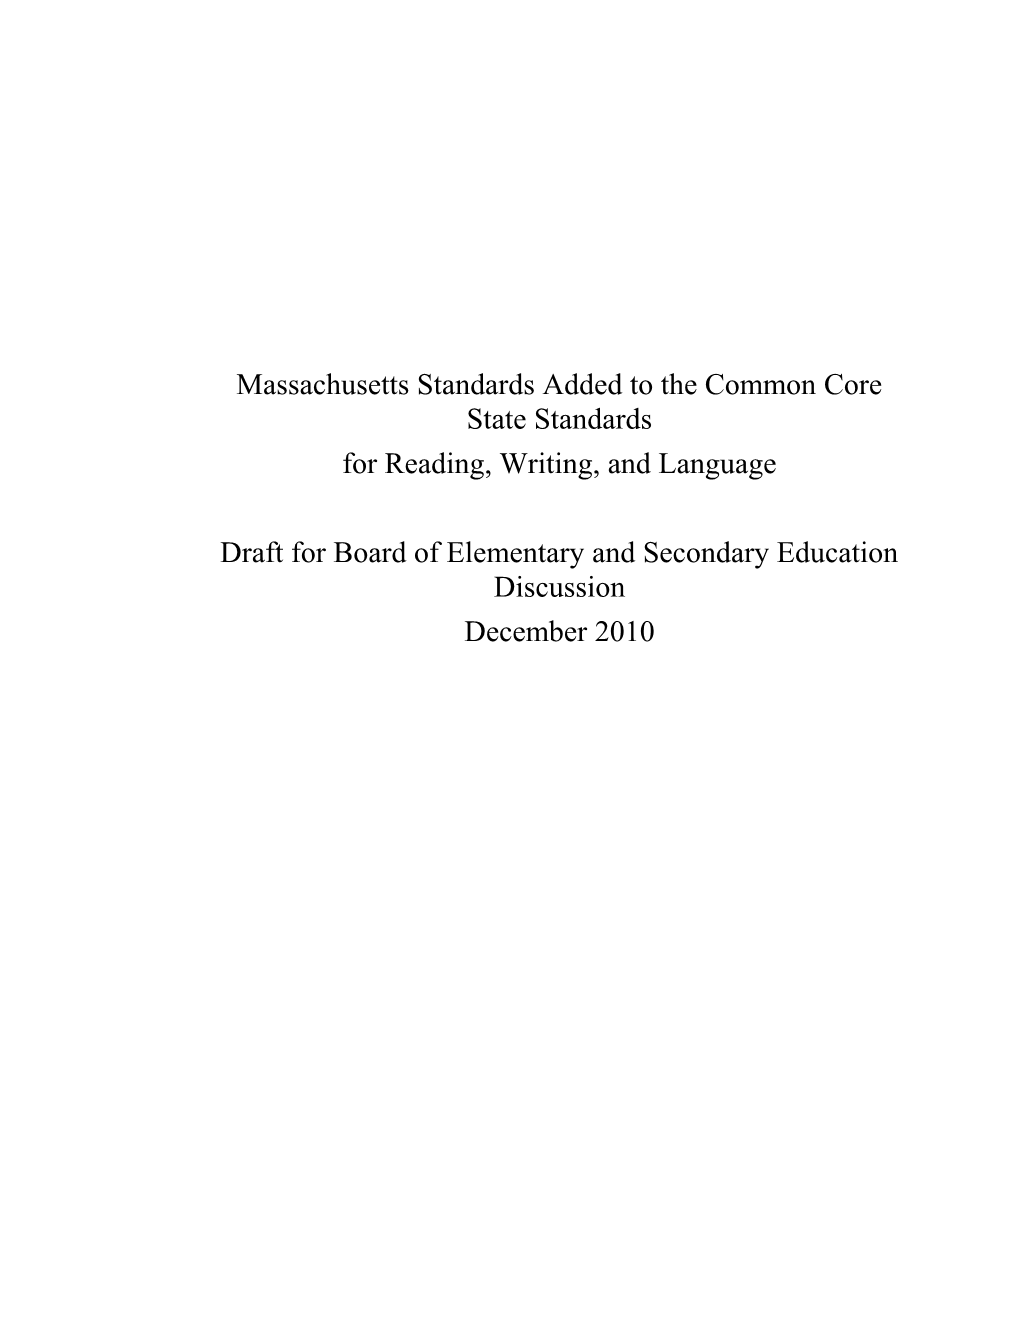 Massachusetts Standards Added to the Common Core State Standards for Reading, Writing